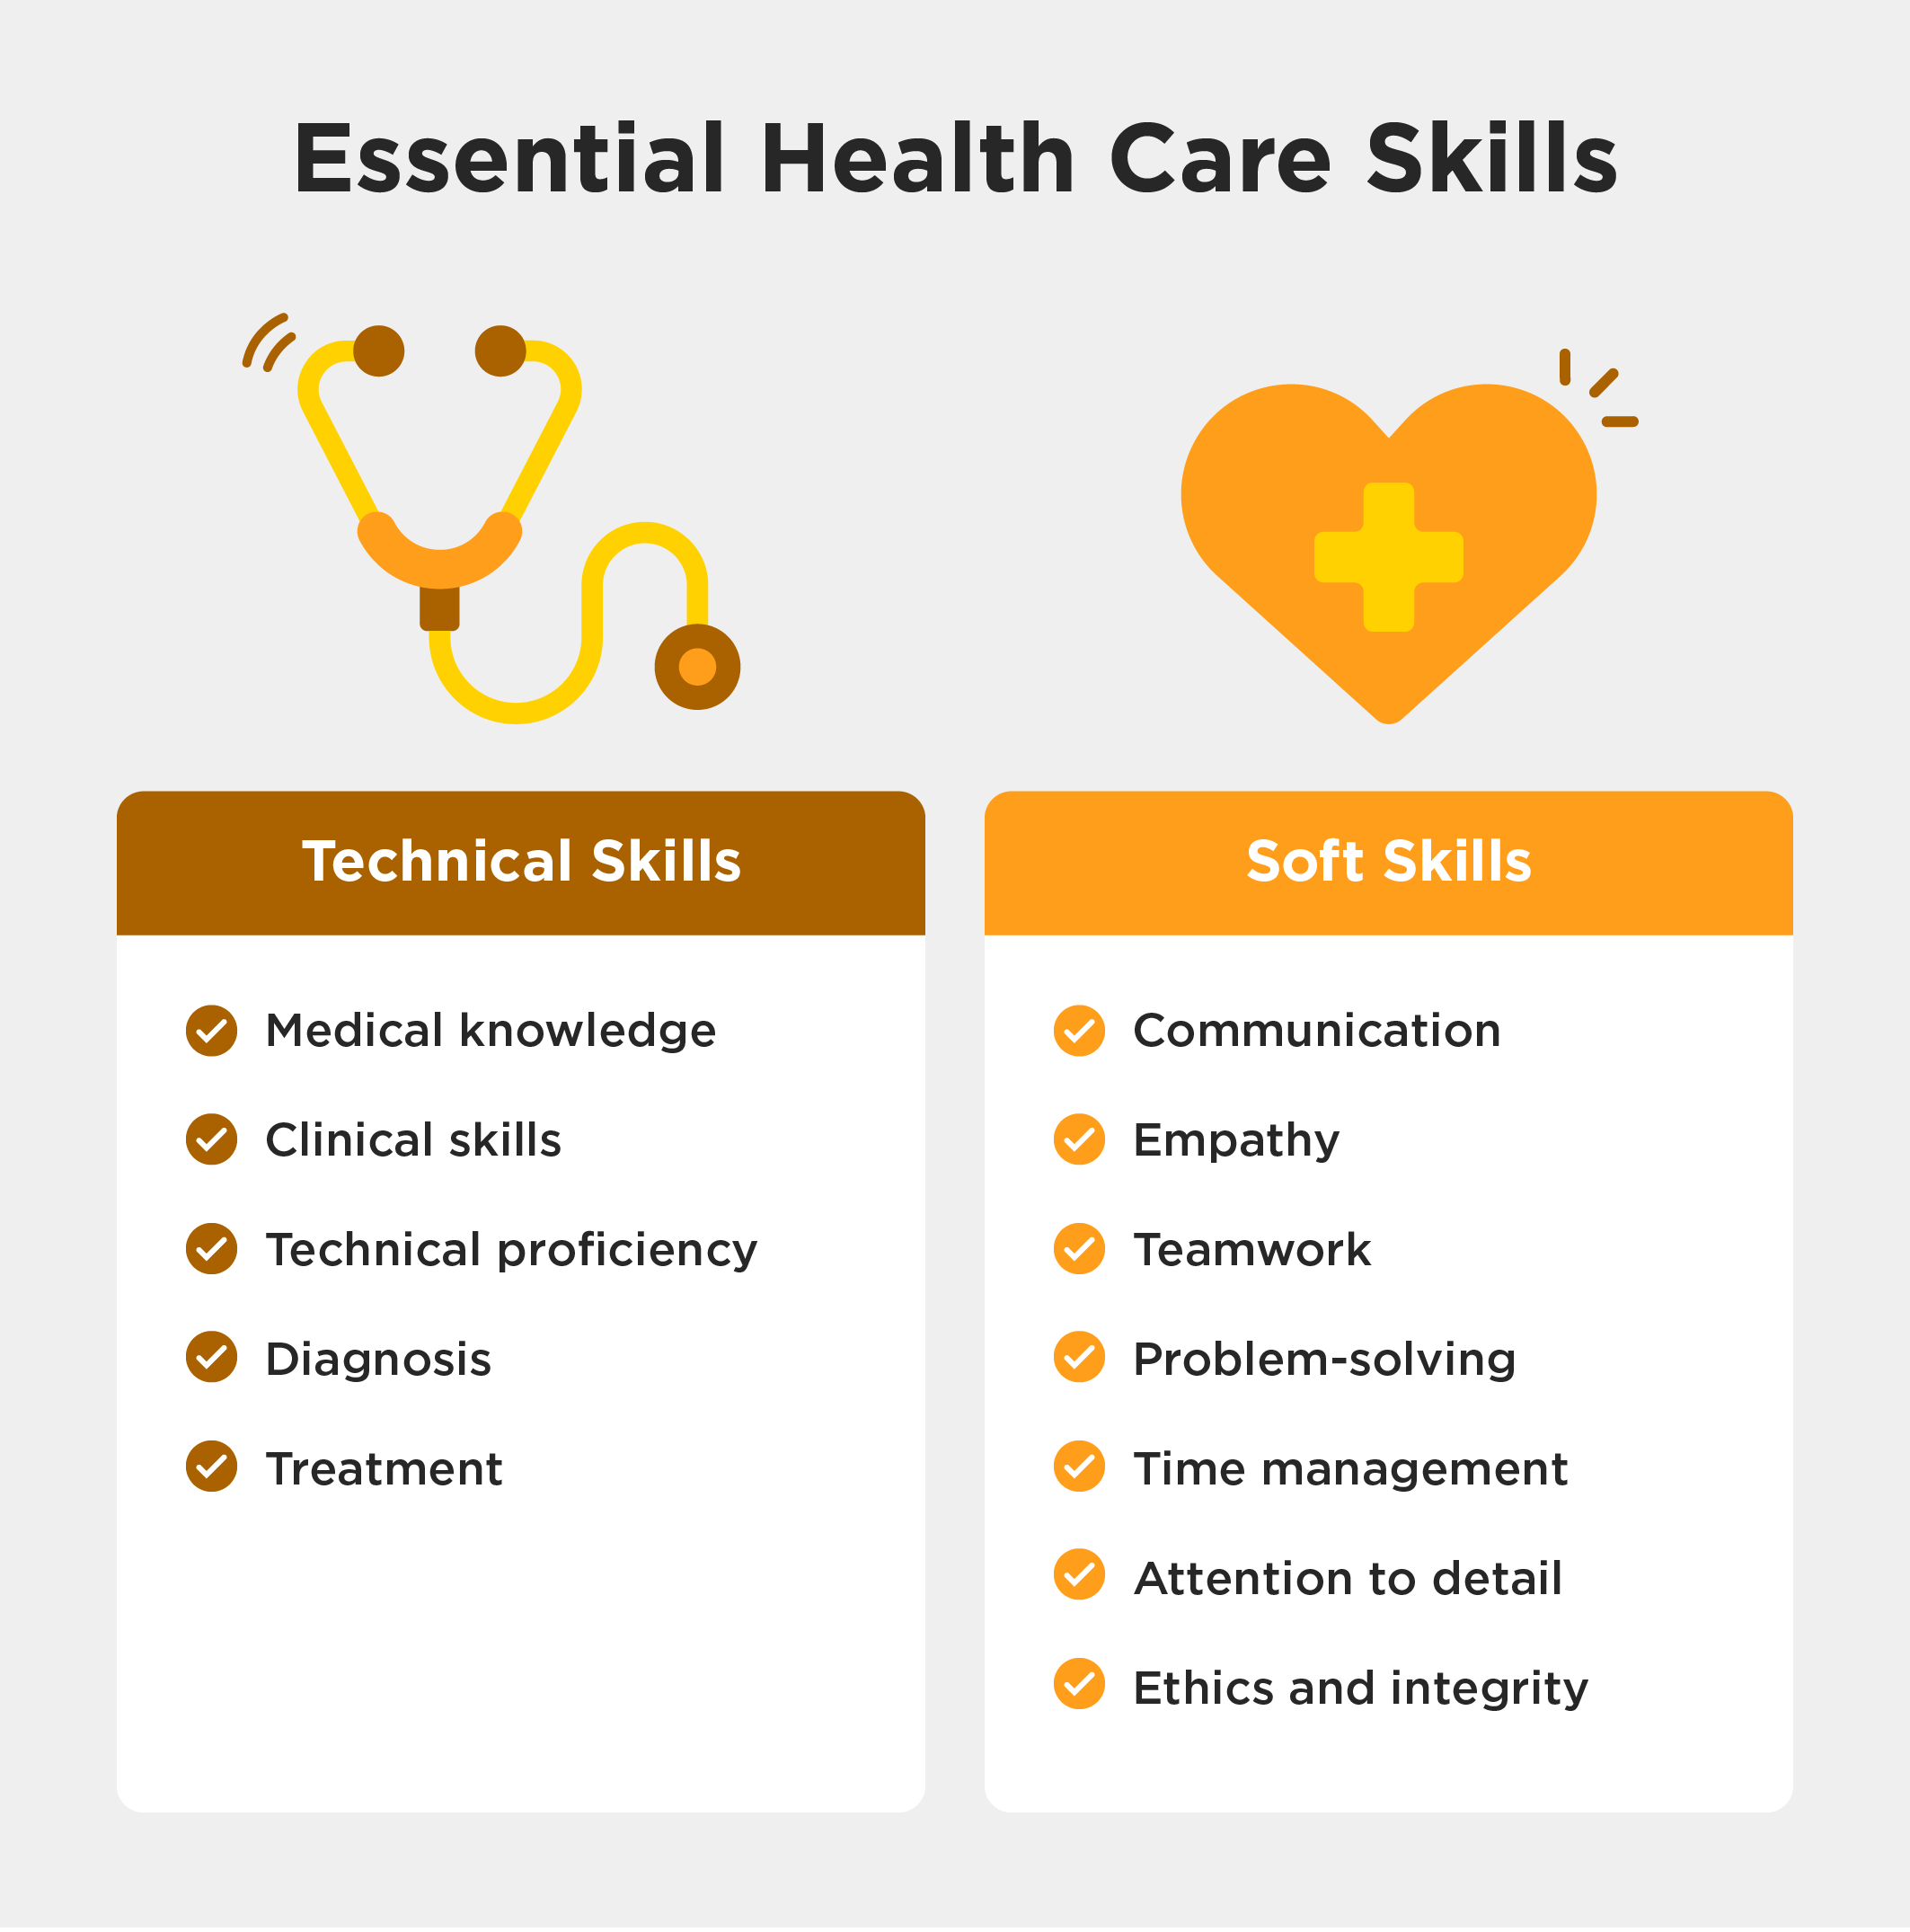 Graphic listing technical and soft skills often required in health care jobs.